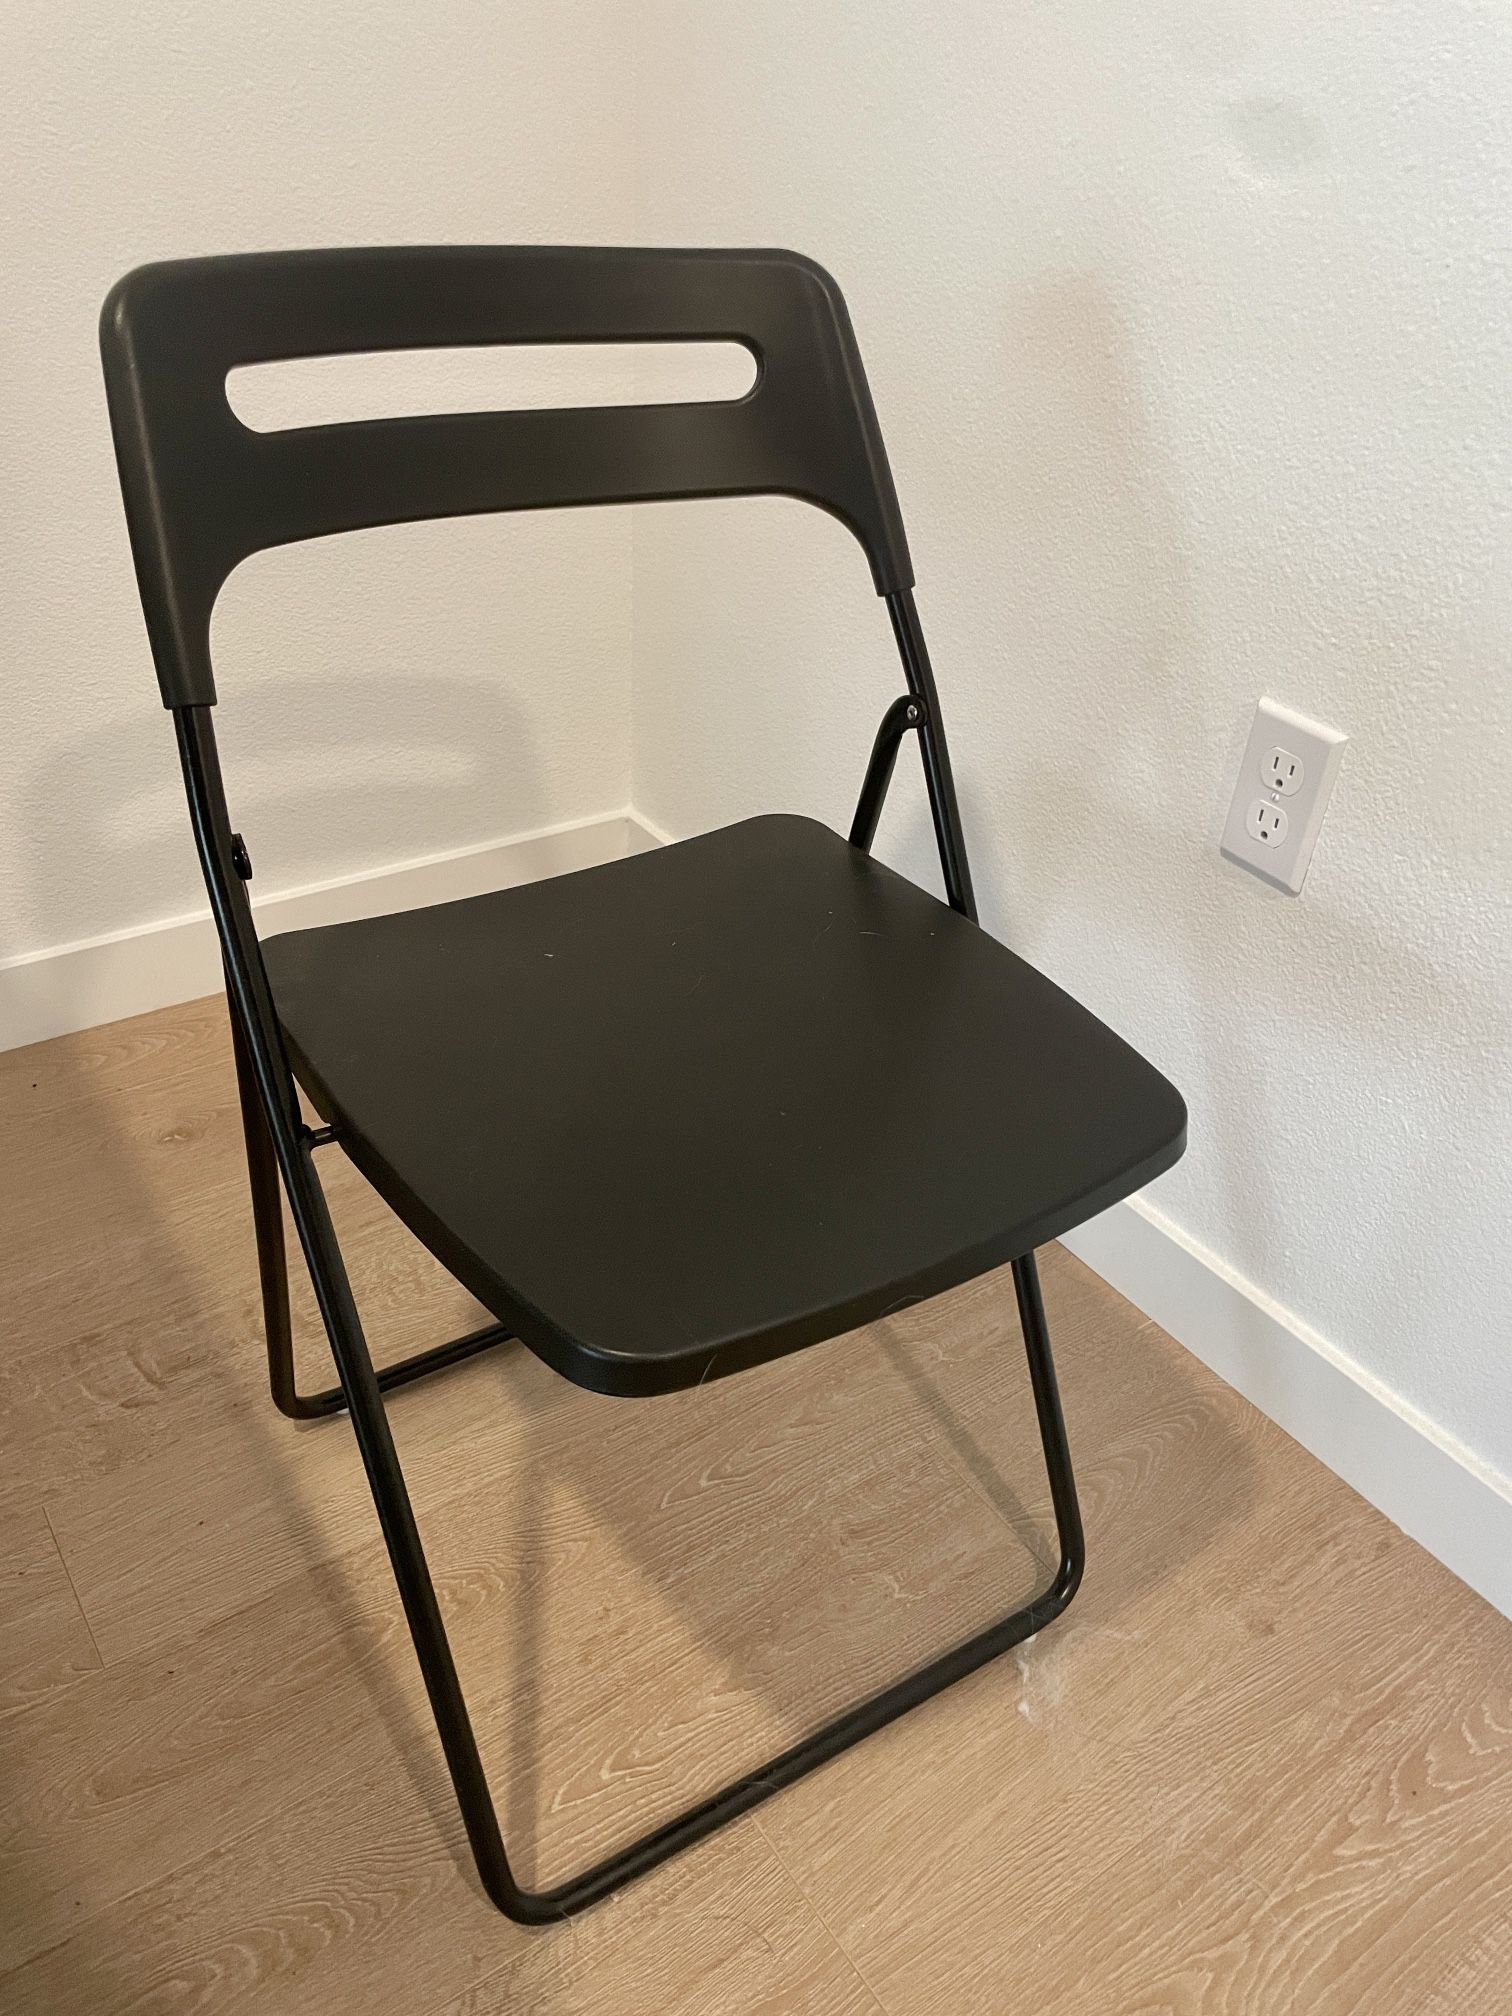 Two Foldable Black Chairs 